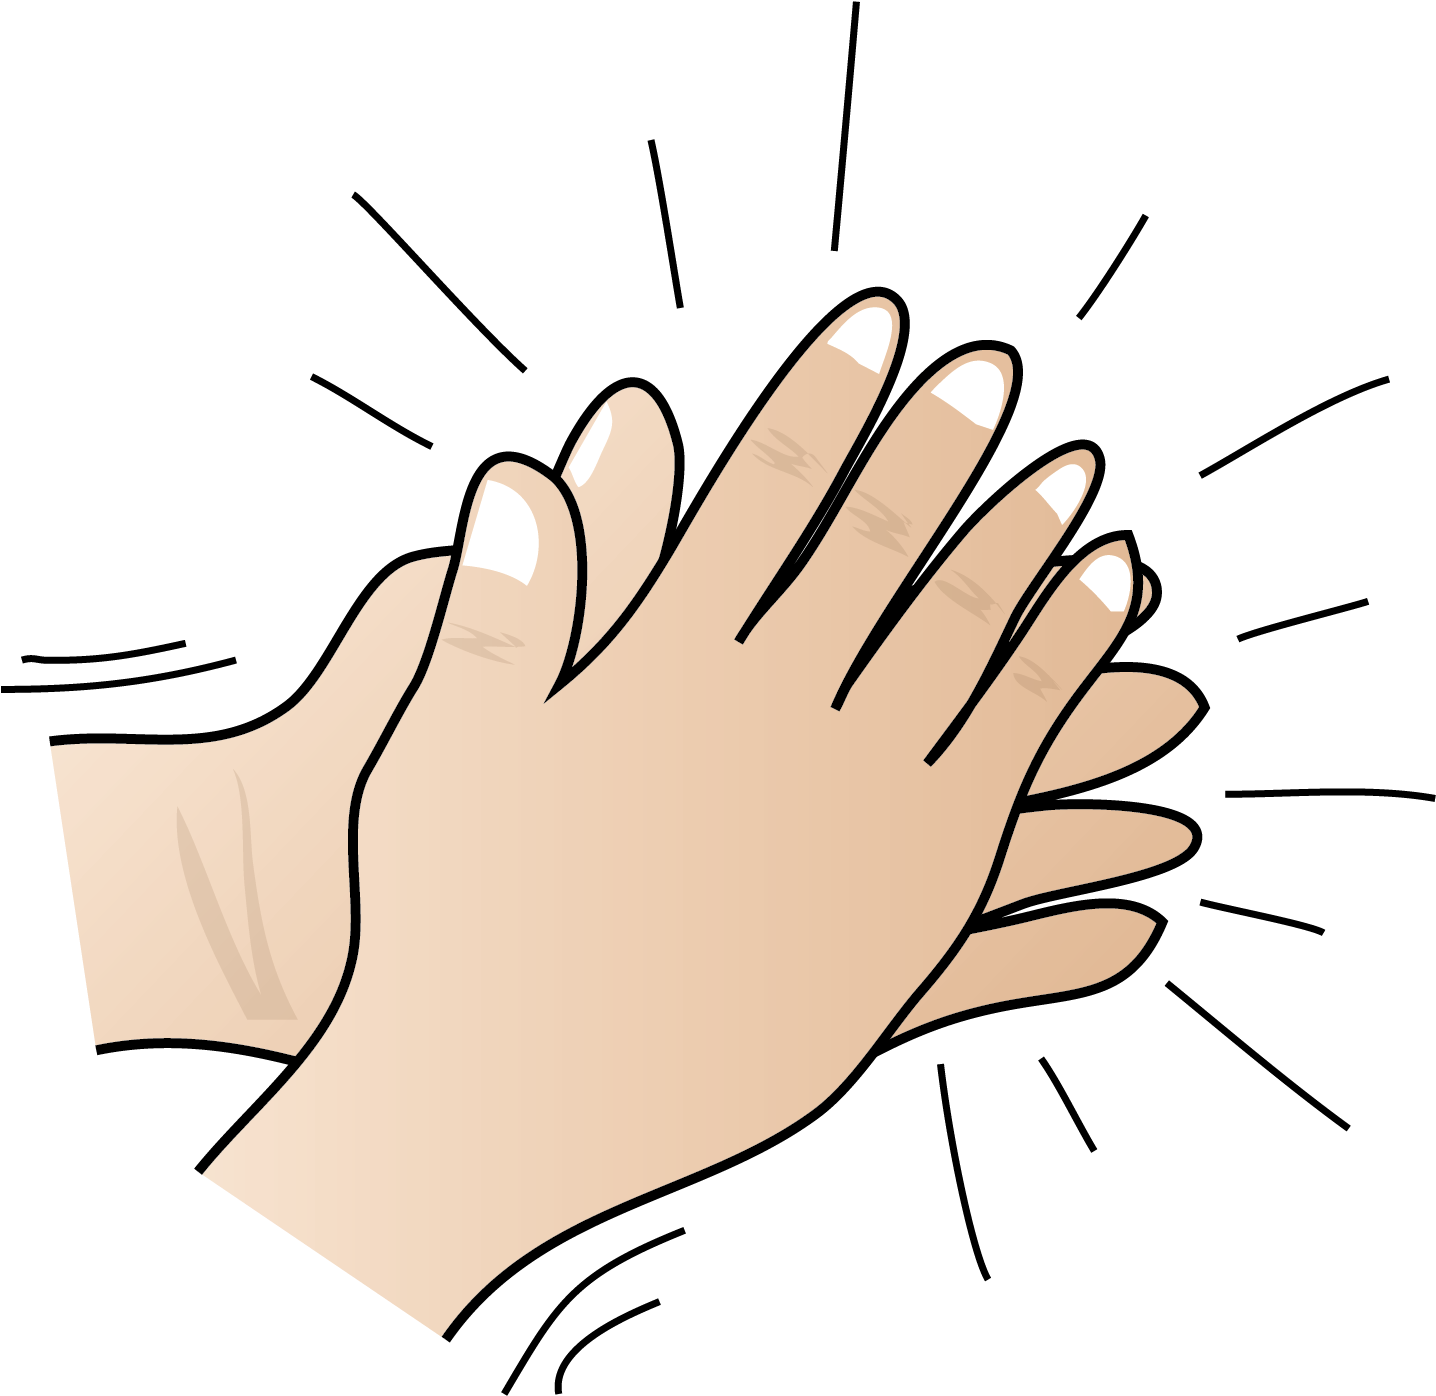 Animated Clapping Hands Illustration PNG